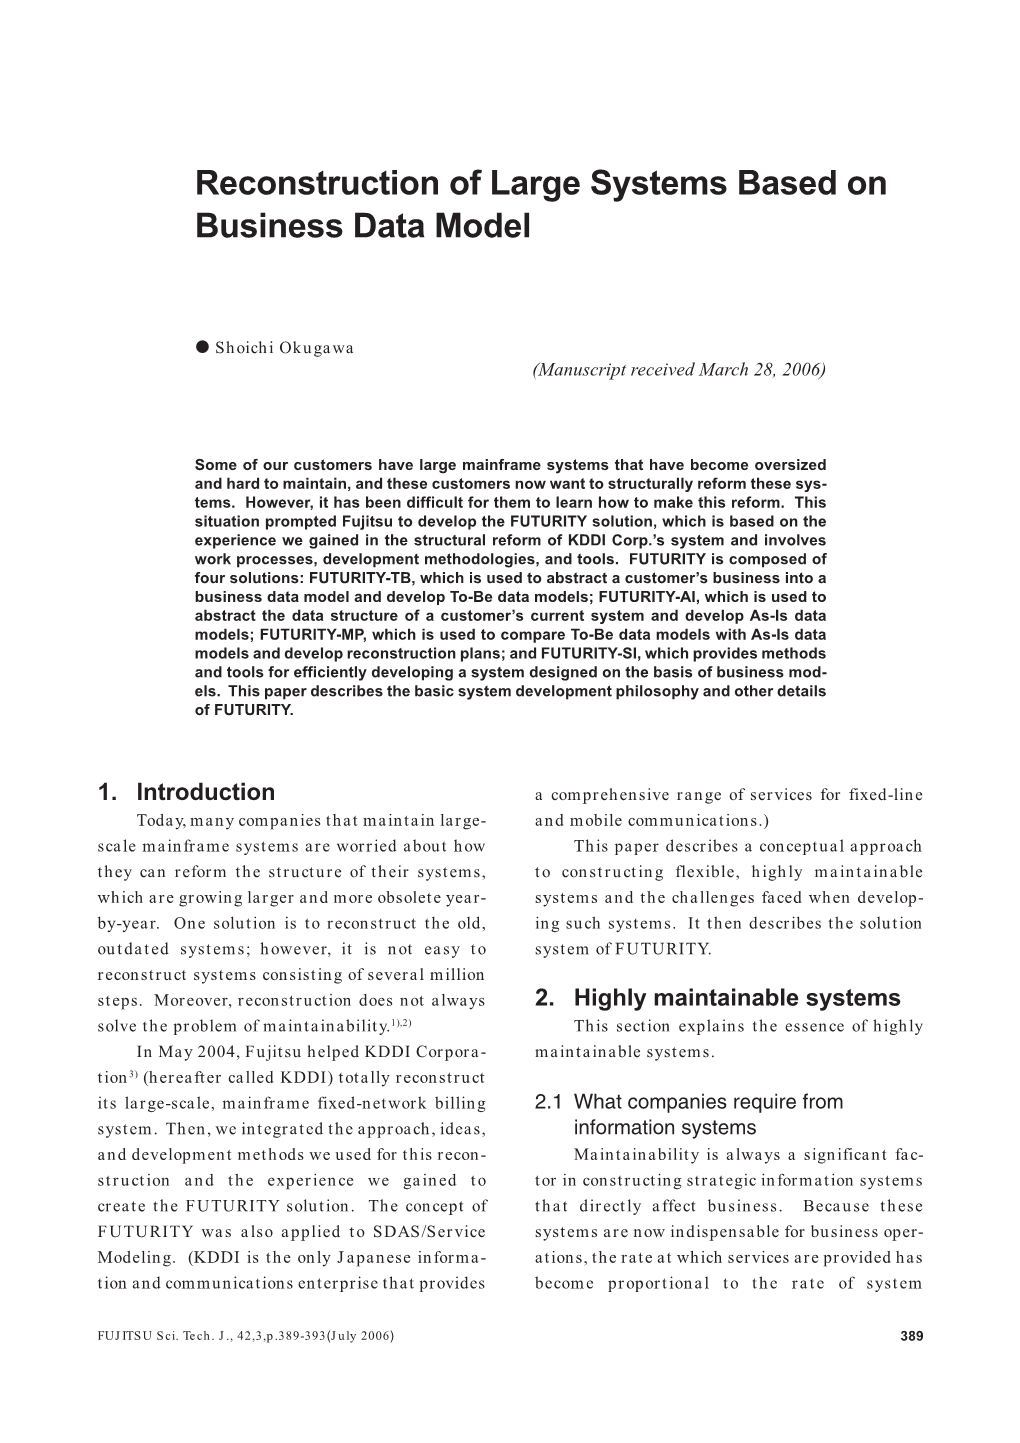 Reconstruction of Large Systems Based on Business Data Model